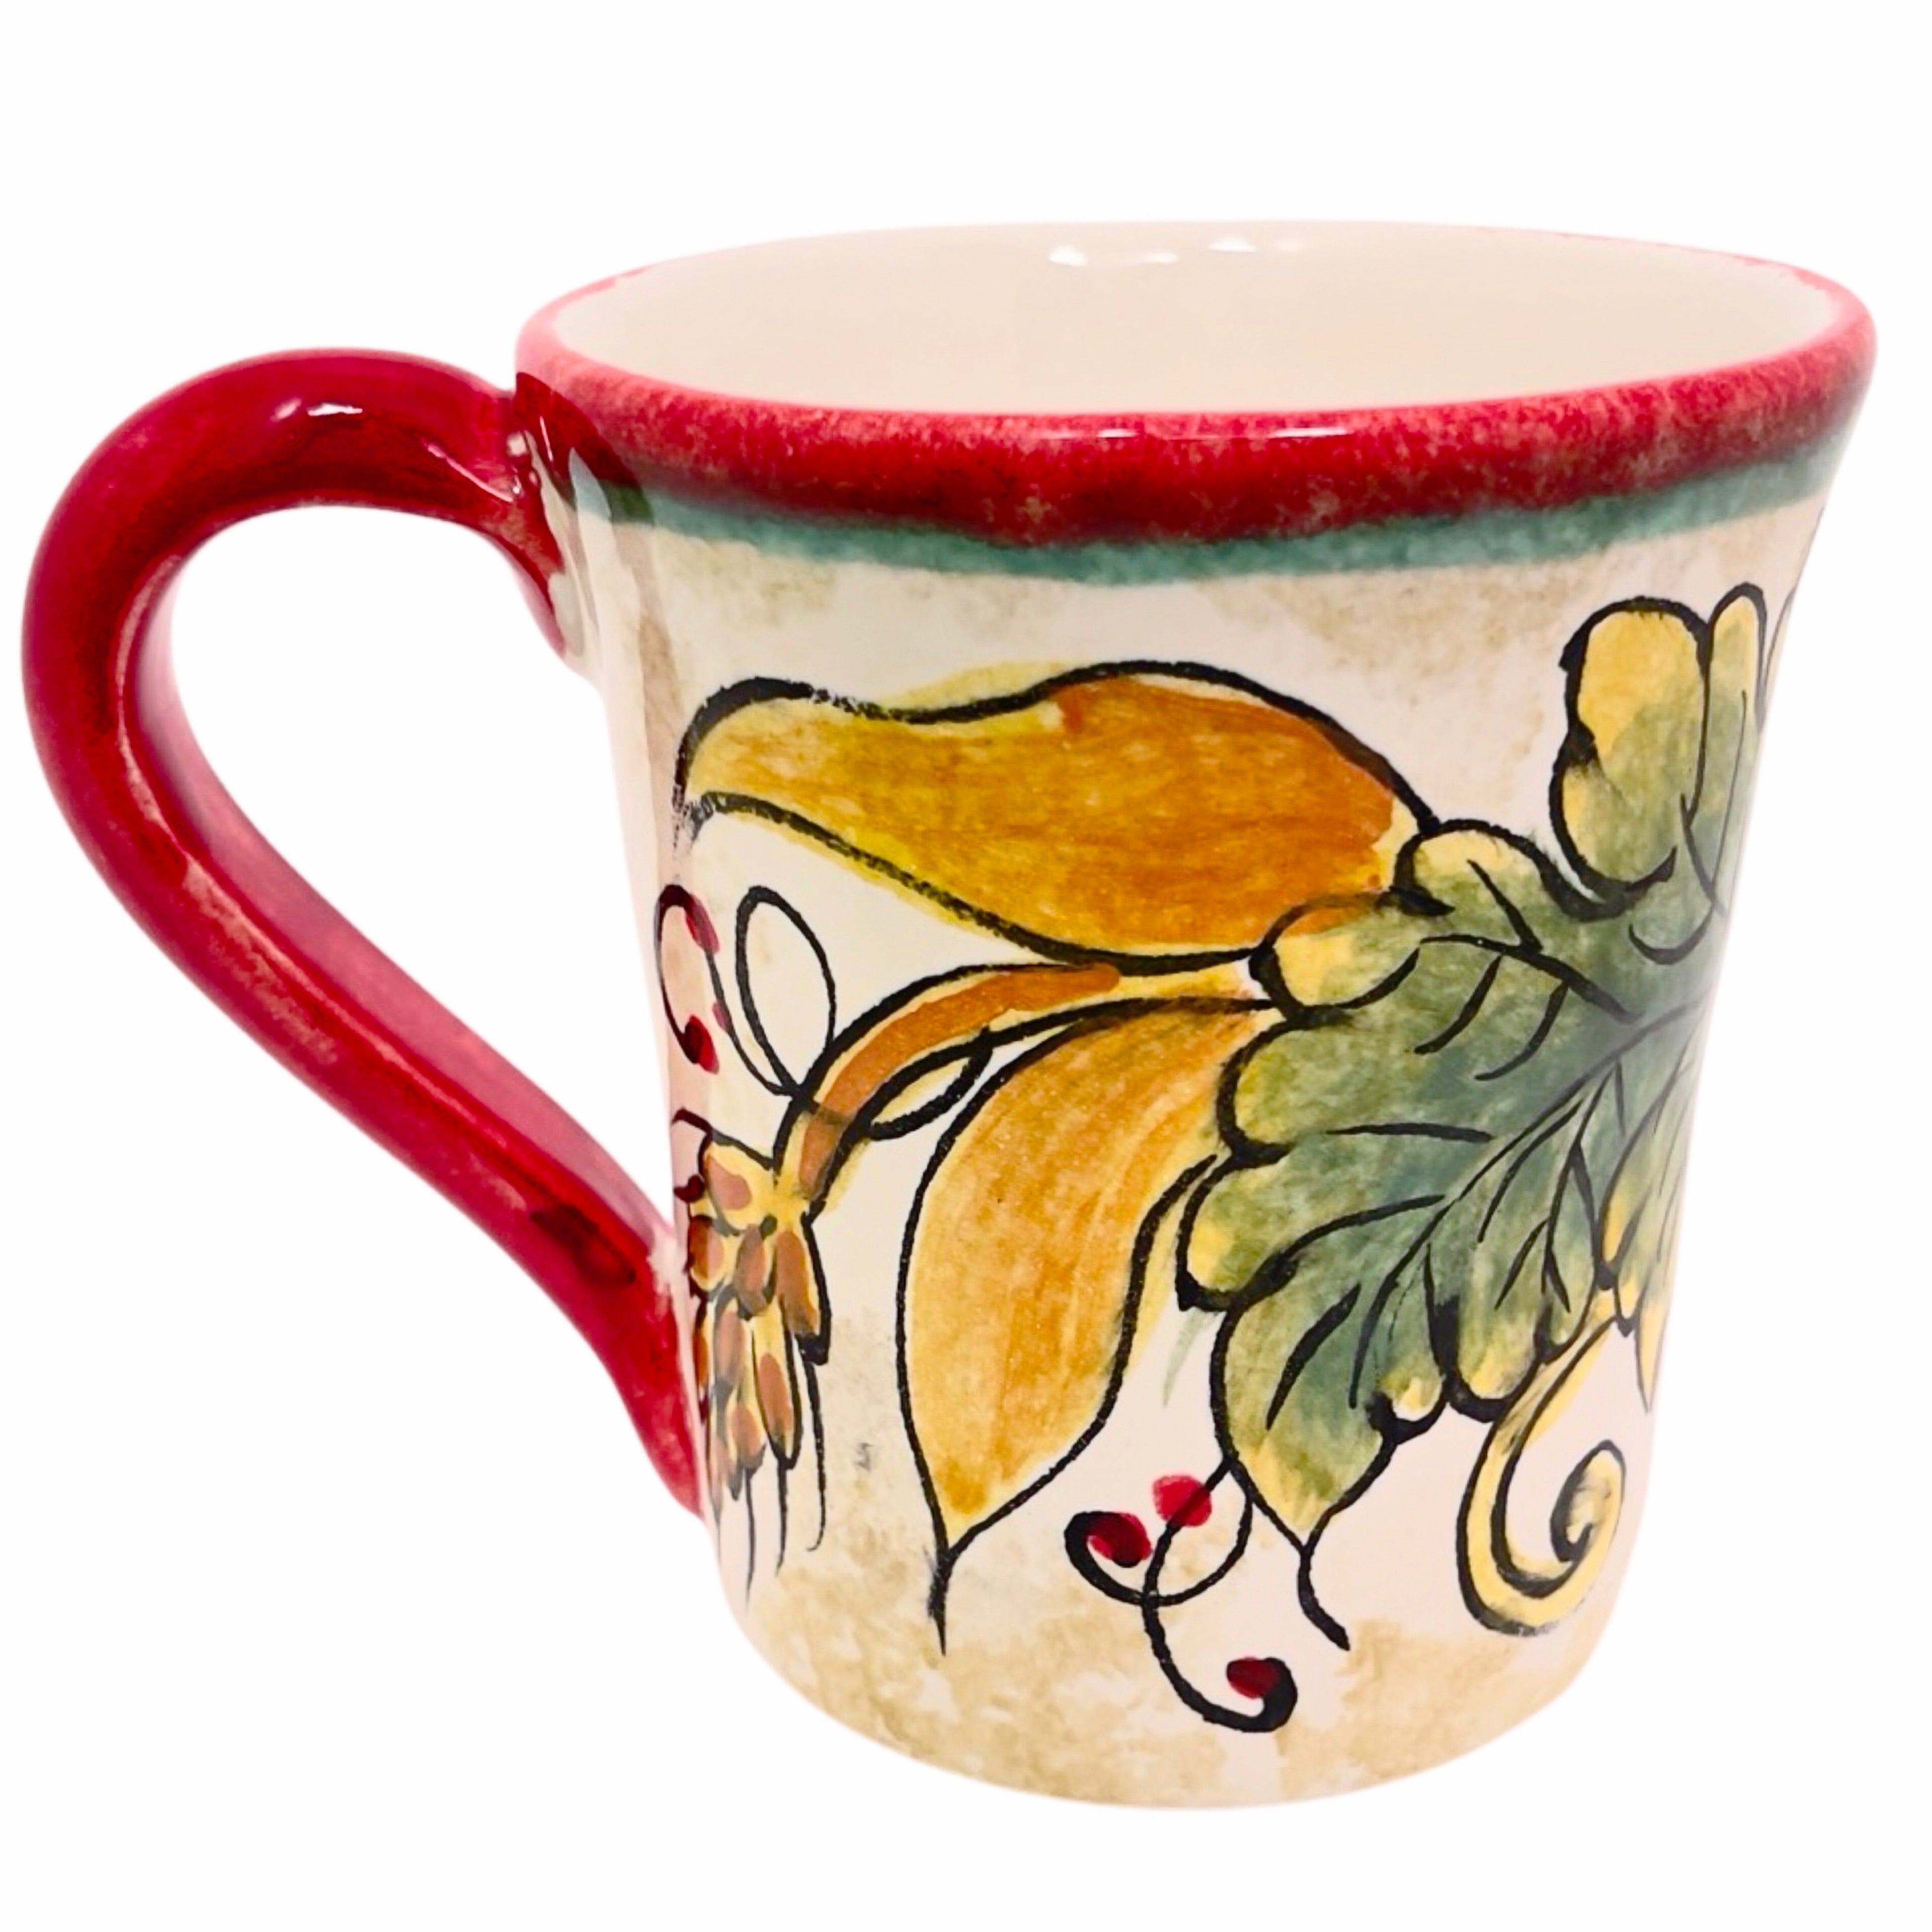 Poppy Mug, ceramics, pottery, italian design, majolica, handmade, handcrafted, handpainted, home decor, kitchen art, home goods, deruta, majolica, Artisan, treasures, traditional art, modern art, gift ideas, style, SF, shop small business, artists, shop online, landmark store, legacy, one of a kind, limited edition, gift guide, gift shop, retail shop, decorations, shopping, italy, home staging, home decorating, home interiors